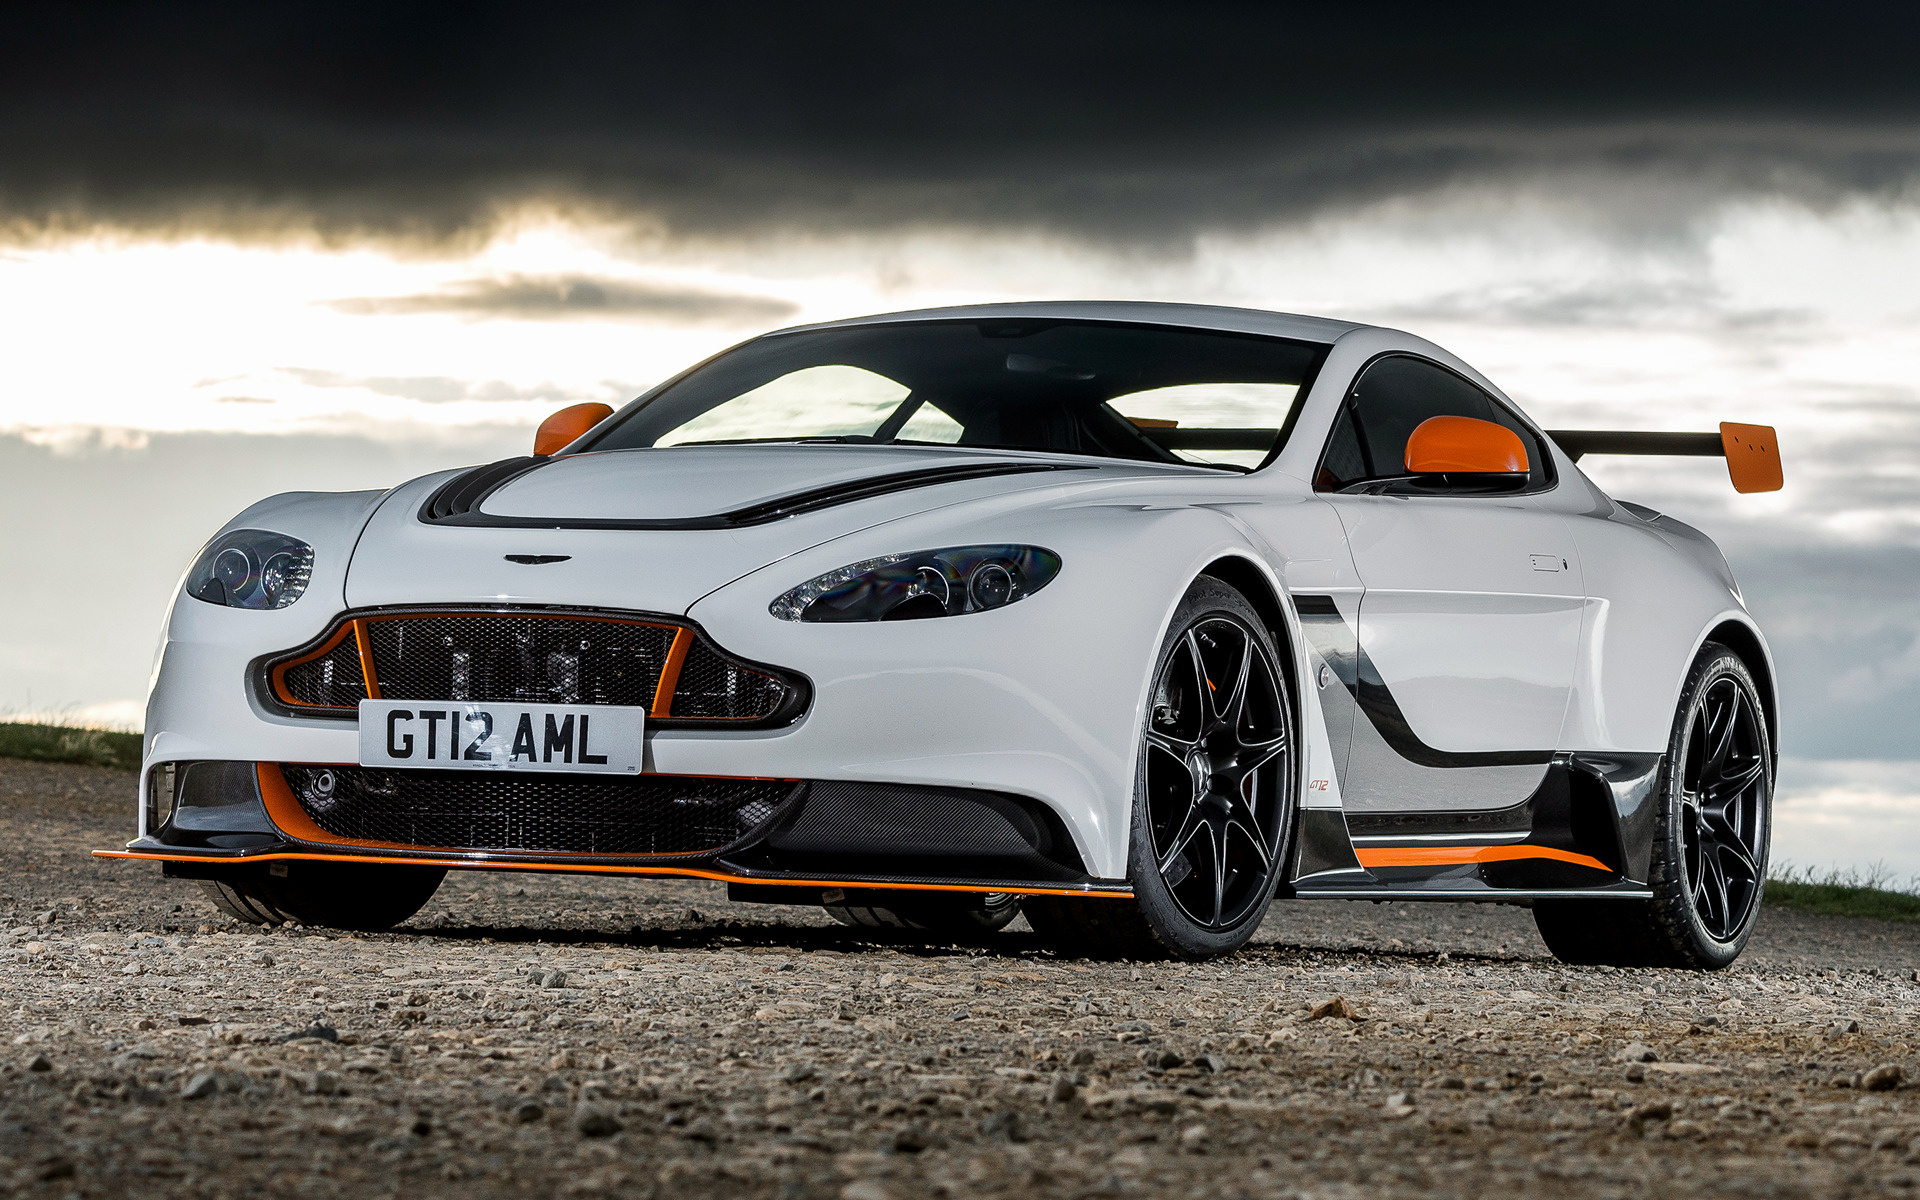 Aston Martin Vantage, Limited edition GT12, Exquisite wallpapers, Track-inspired design, 1920x1200 HD Desktop